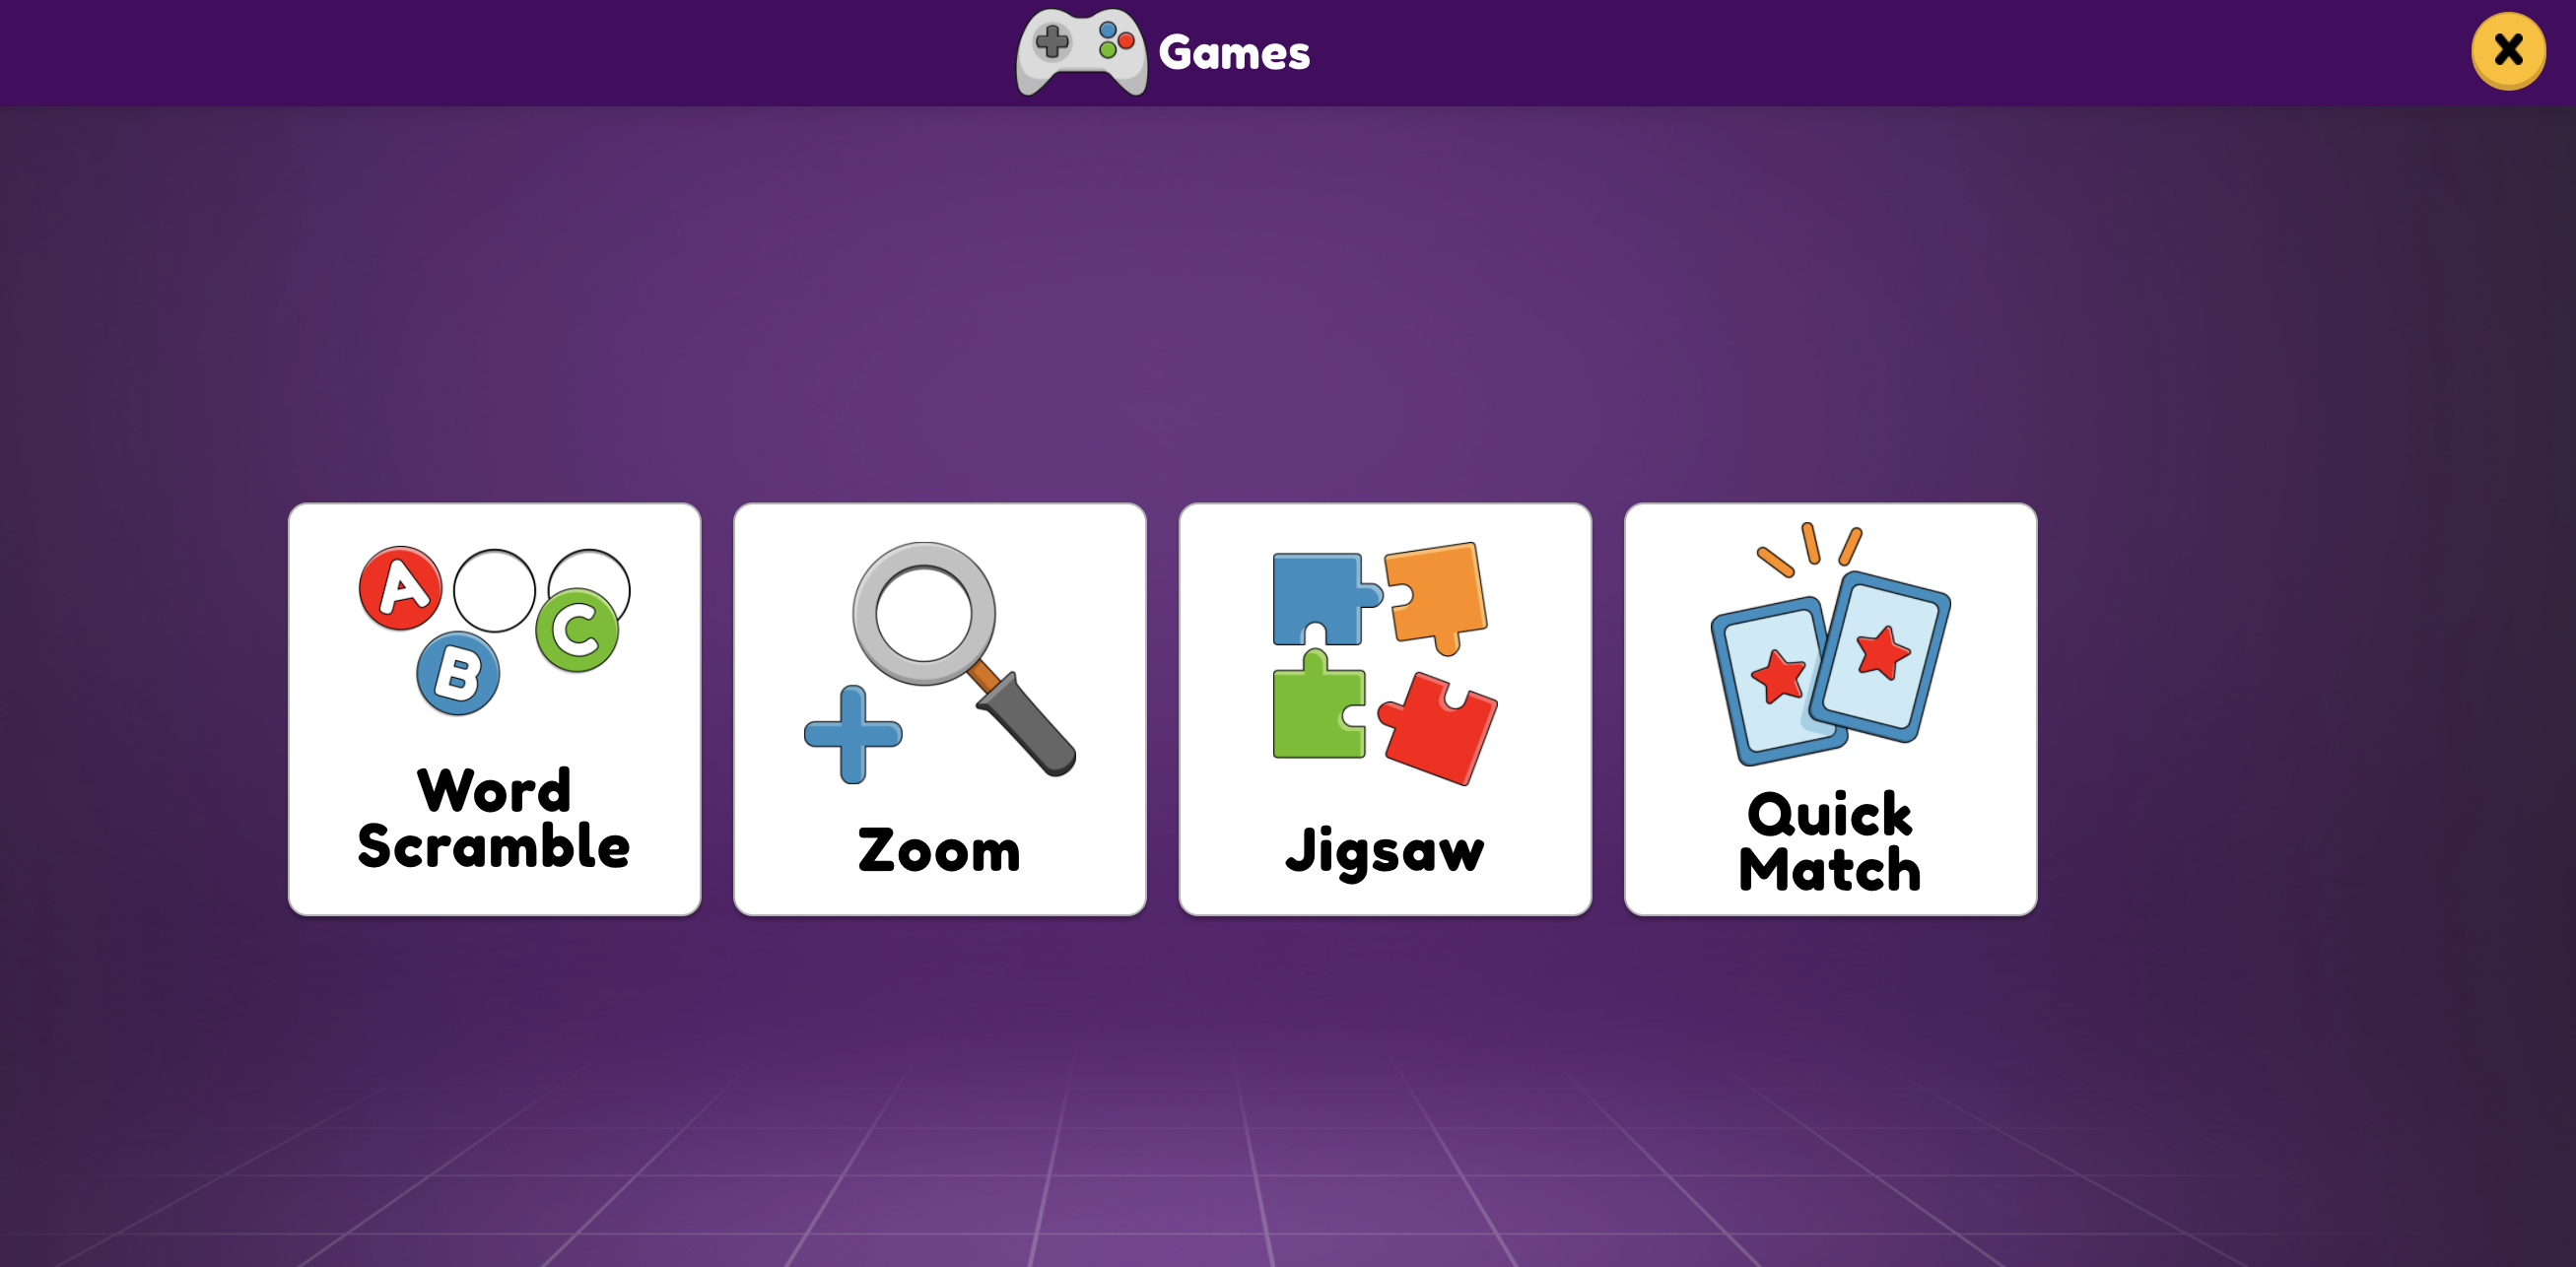 PebbleGo Next games include word scramble, zoom, jigsaw, and quick match.